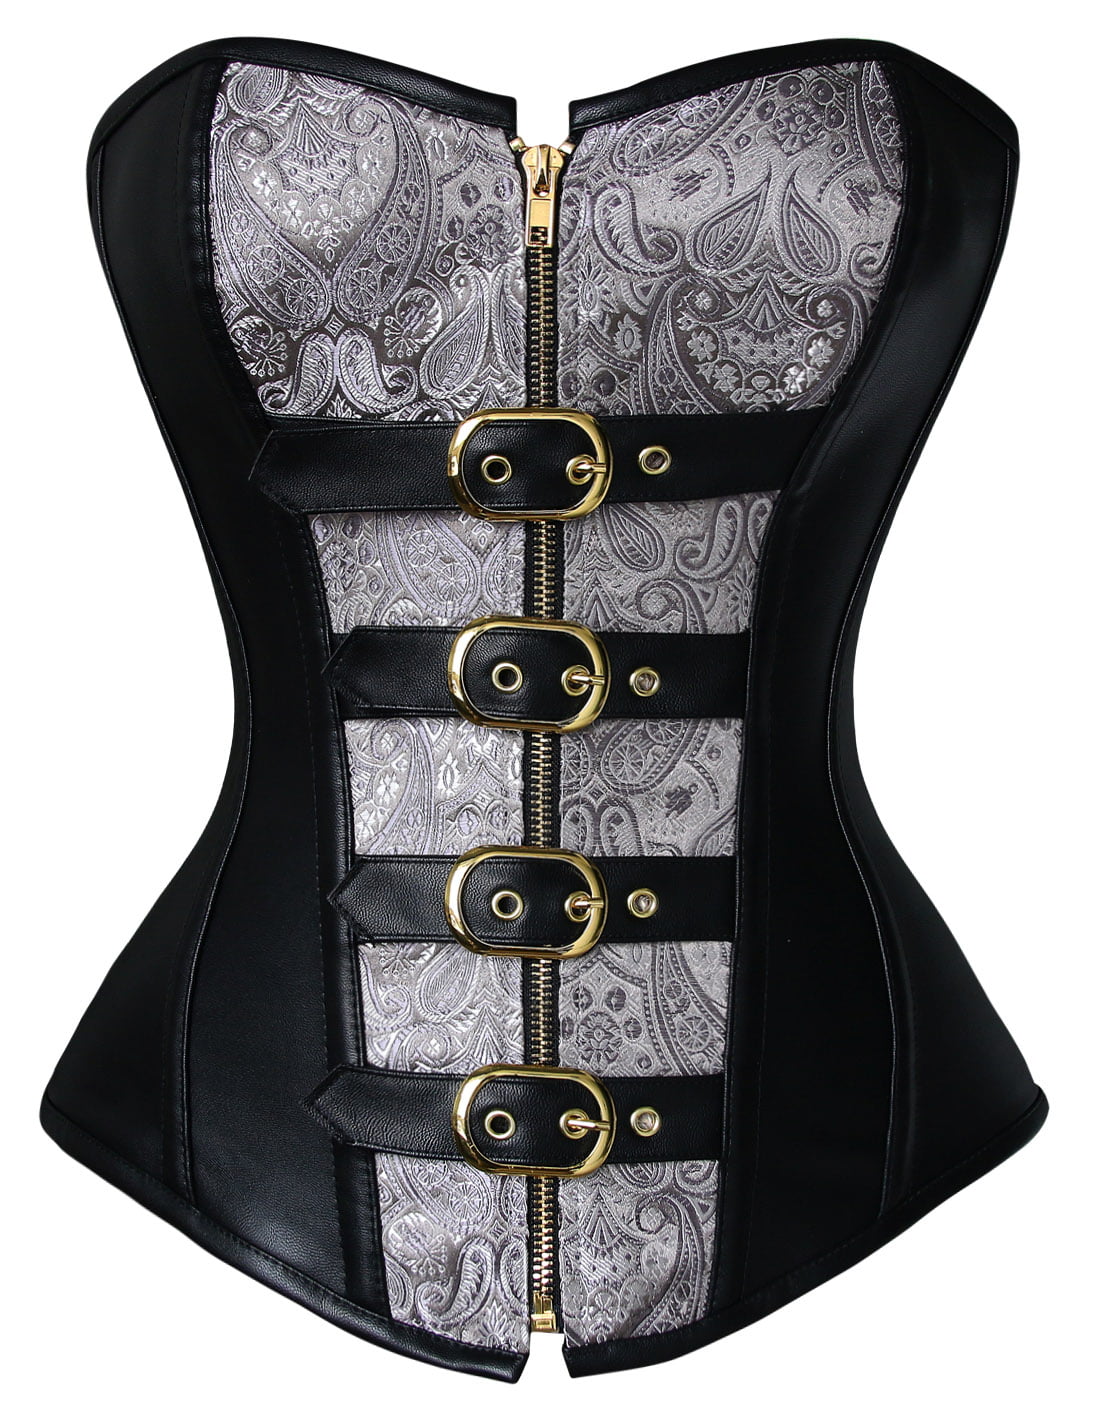 Charmian Womens Spiral Steel Boned Steampunk Gothic Bustier Corset with Chains